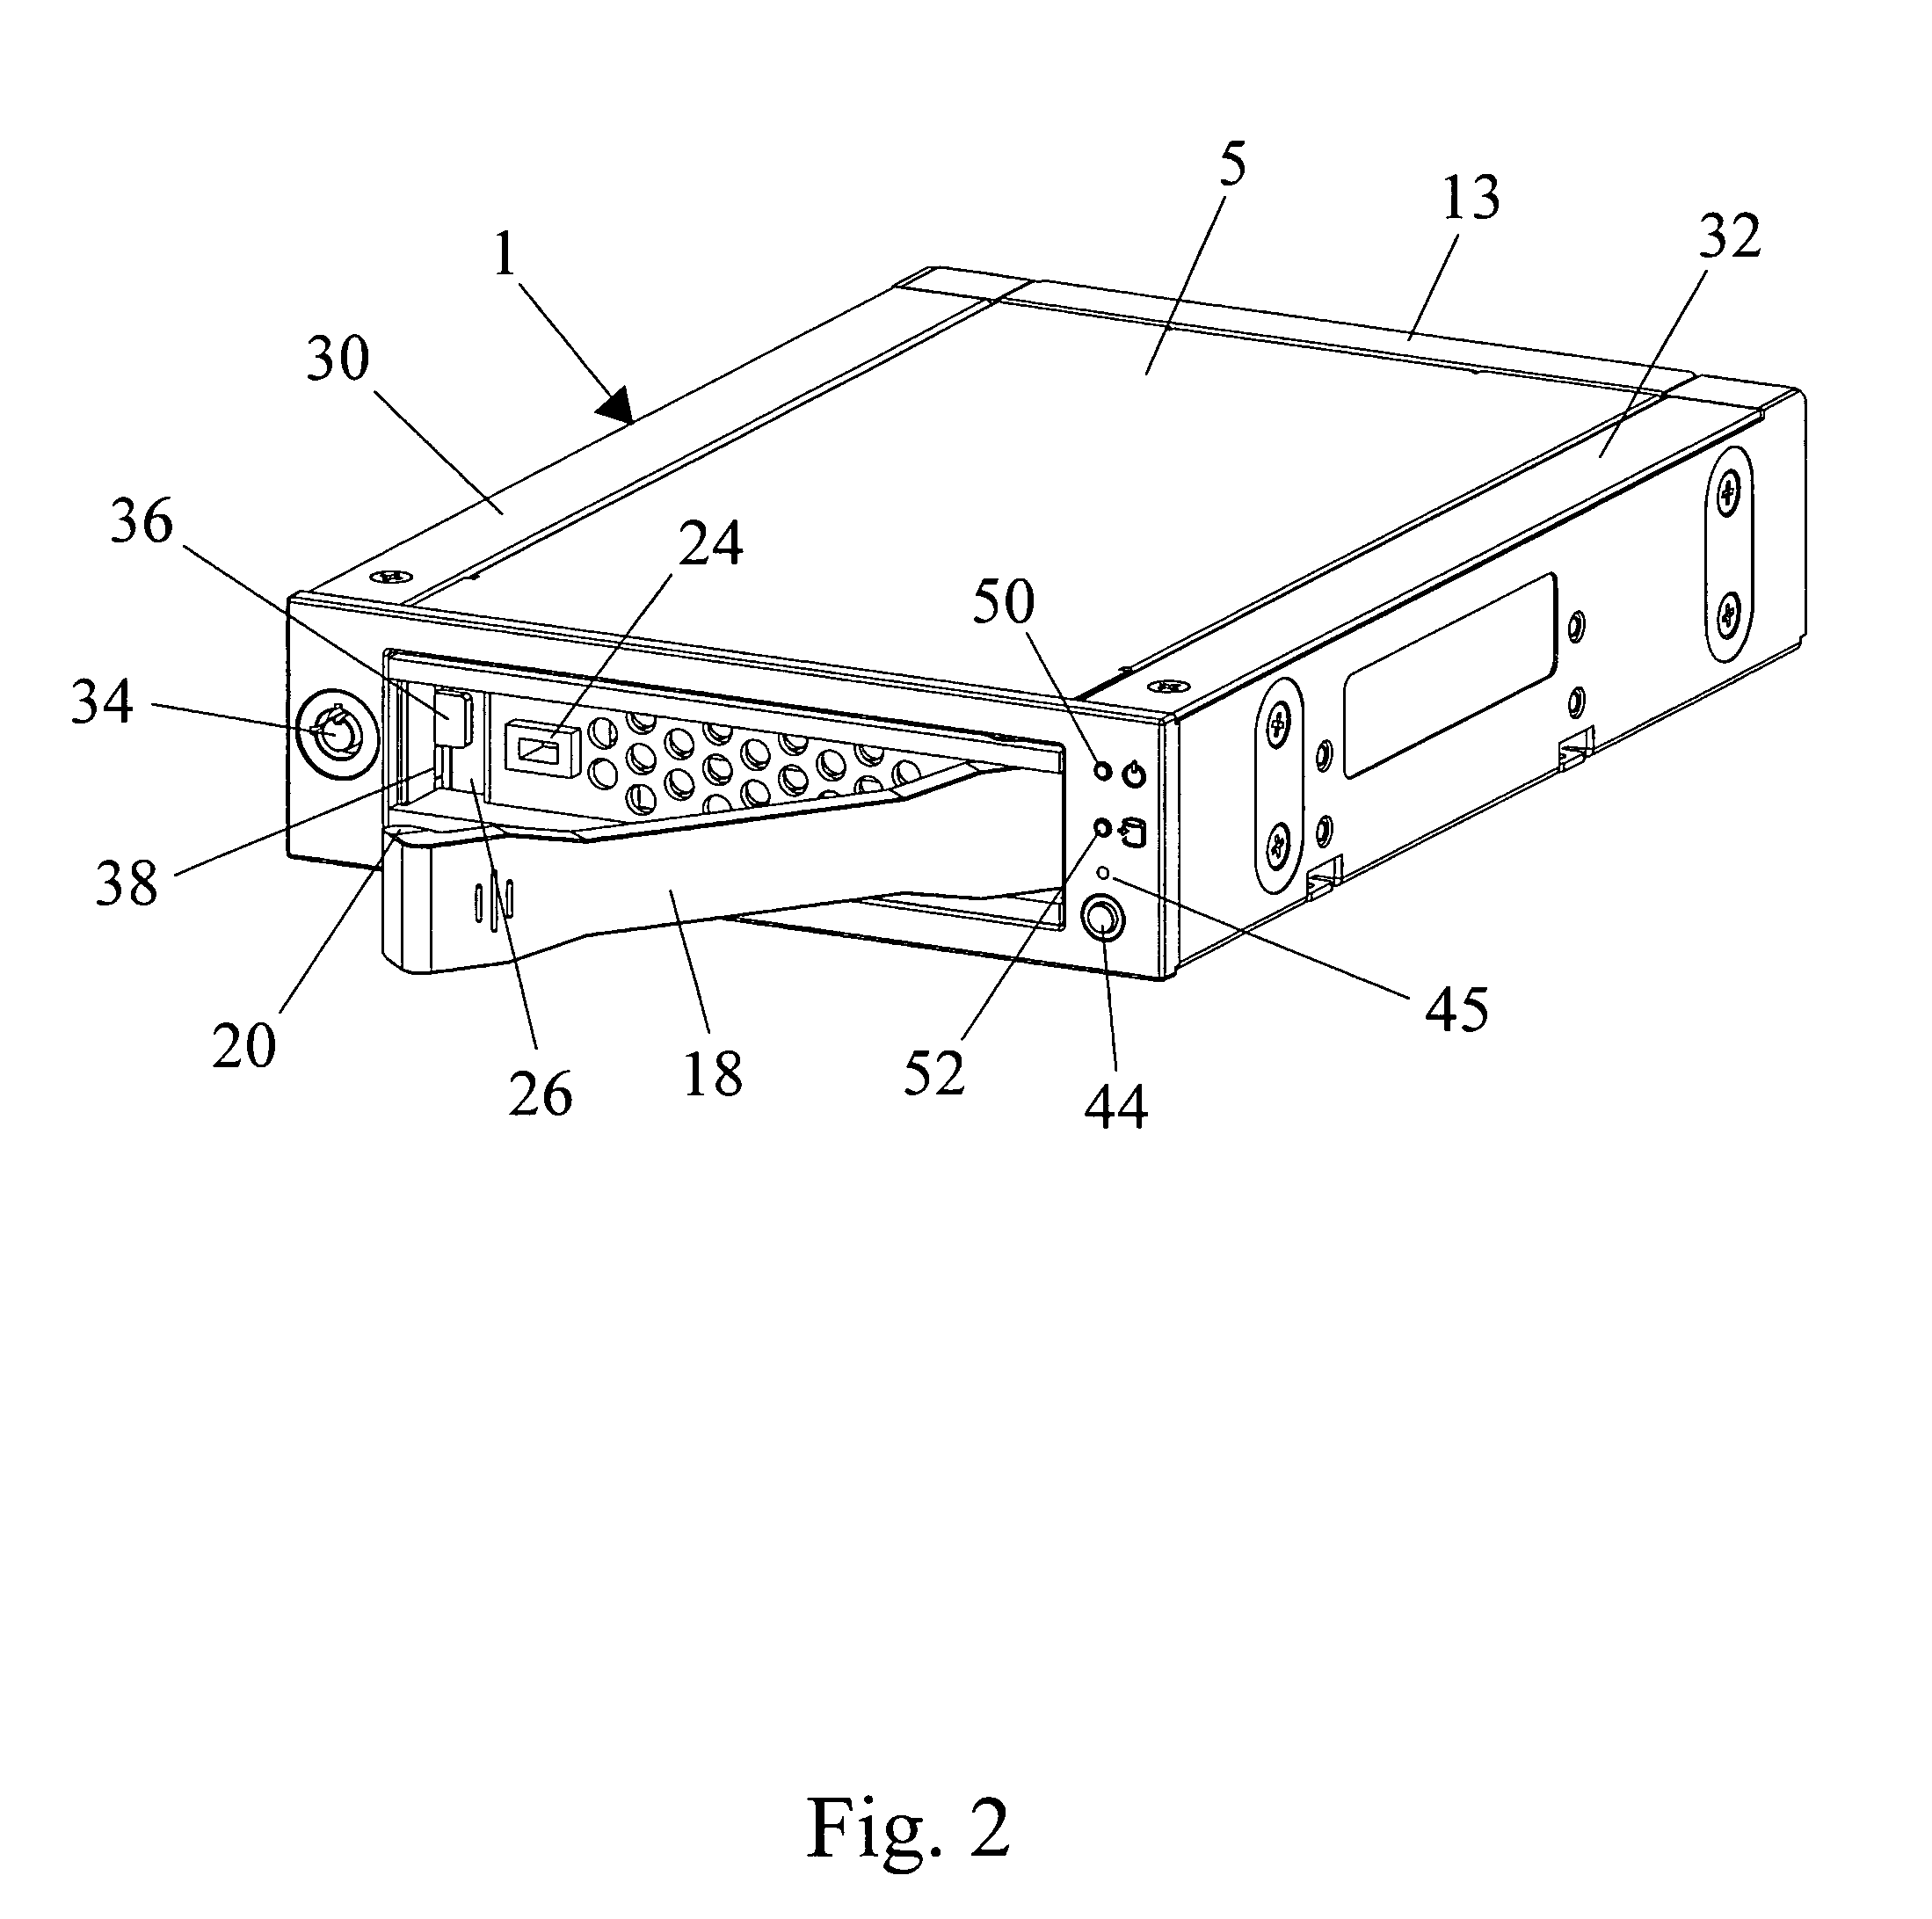 Receiving frame having removable computer drive carrier and lock